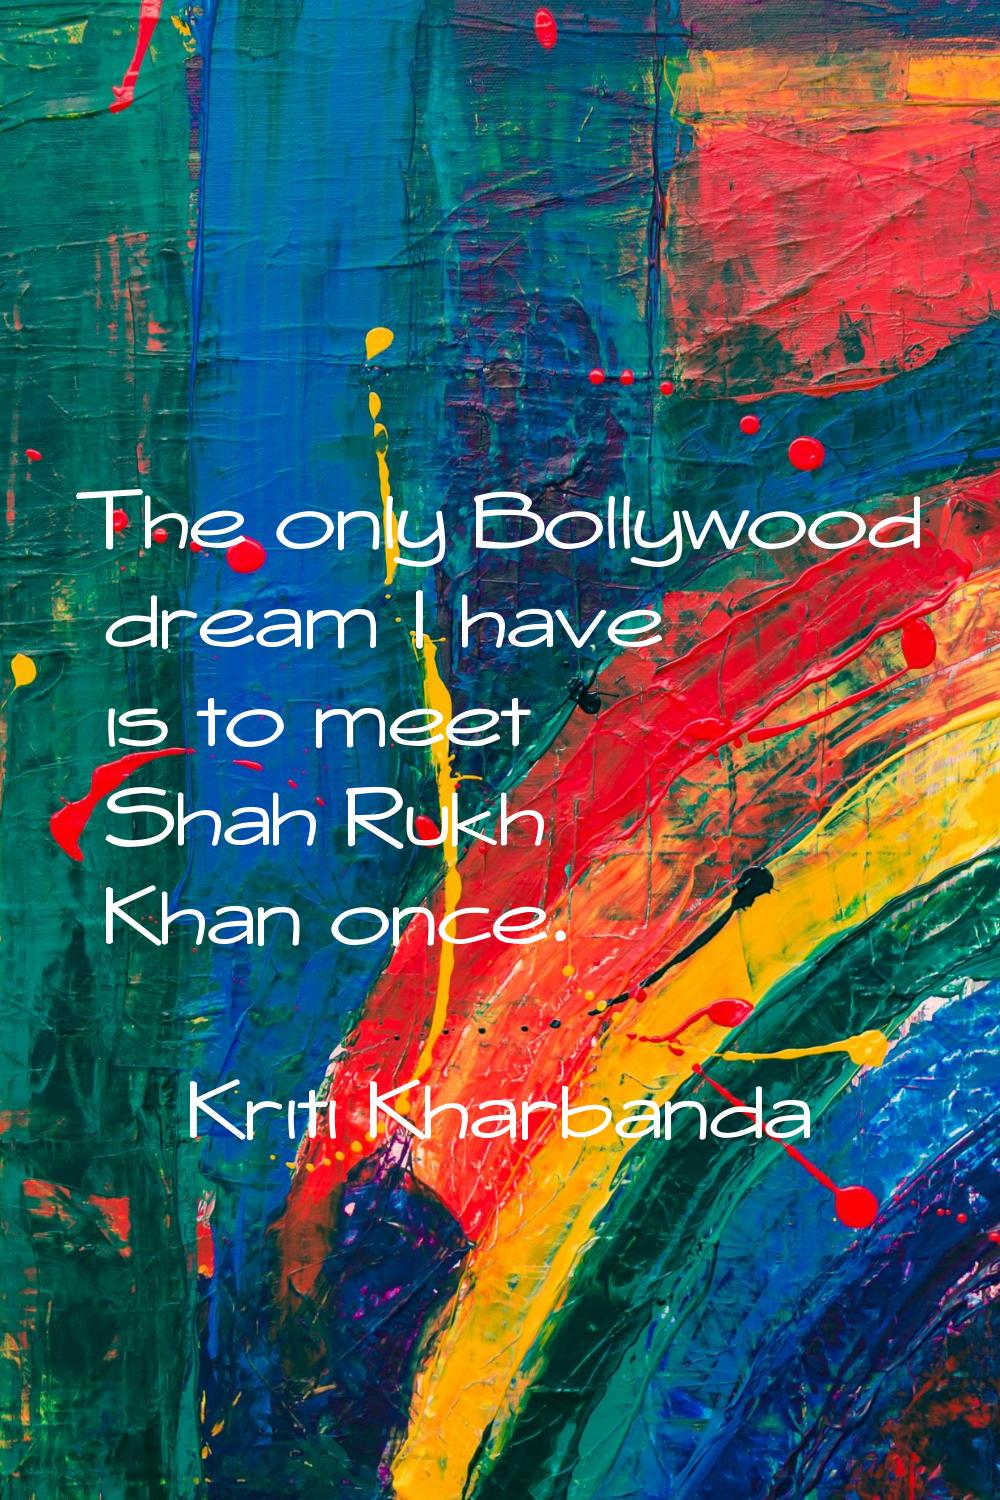 The only Bollywood dream I have is to meet Shah Rukh Khan once.